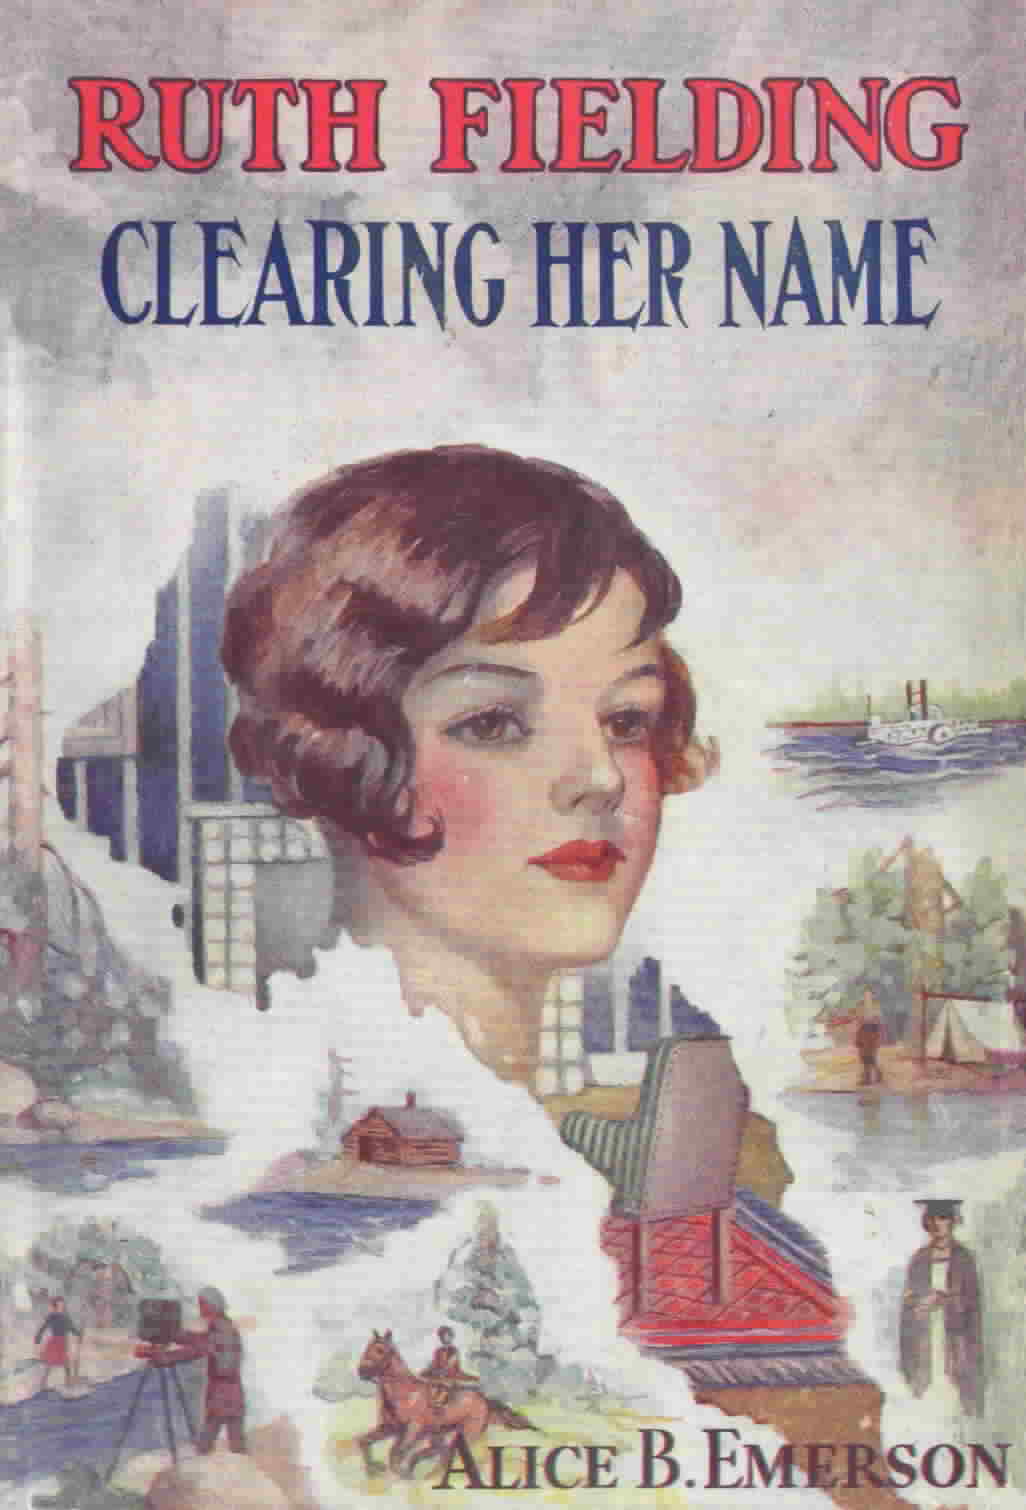 25. Ruth Fielding Clearing Her Name